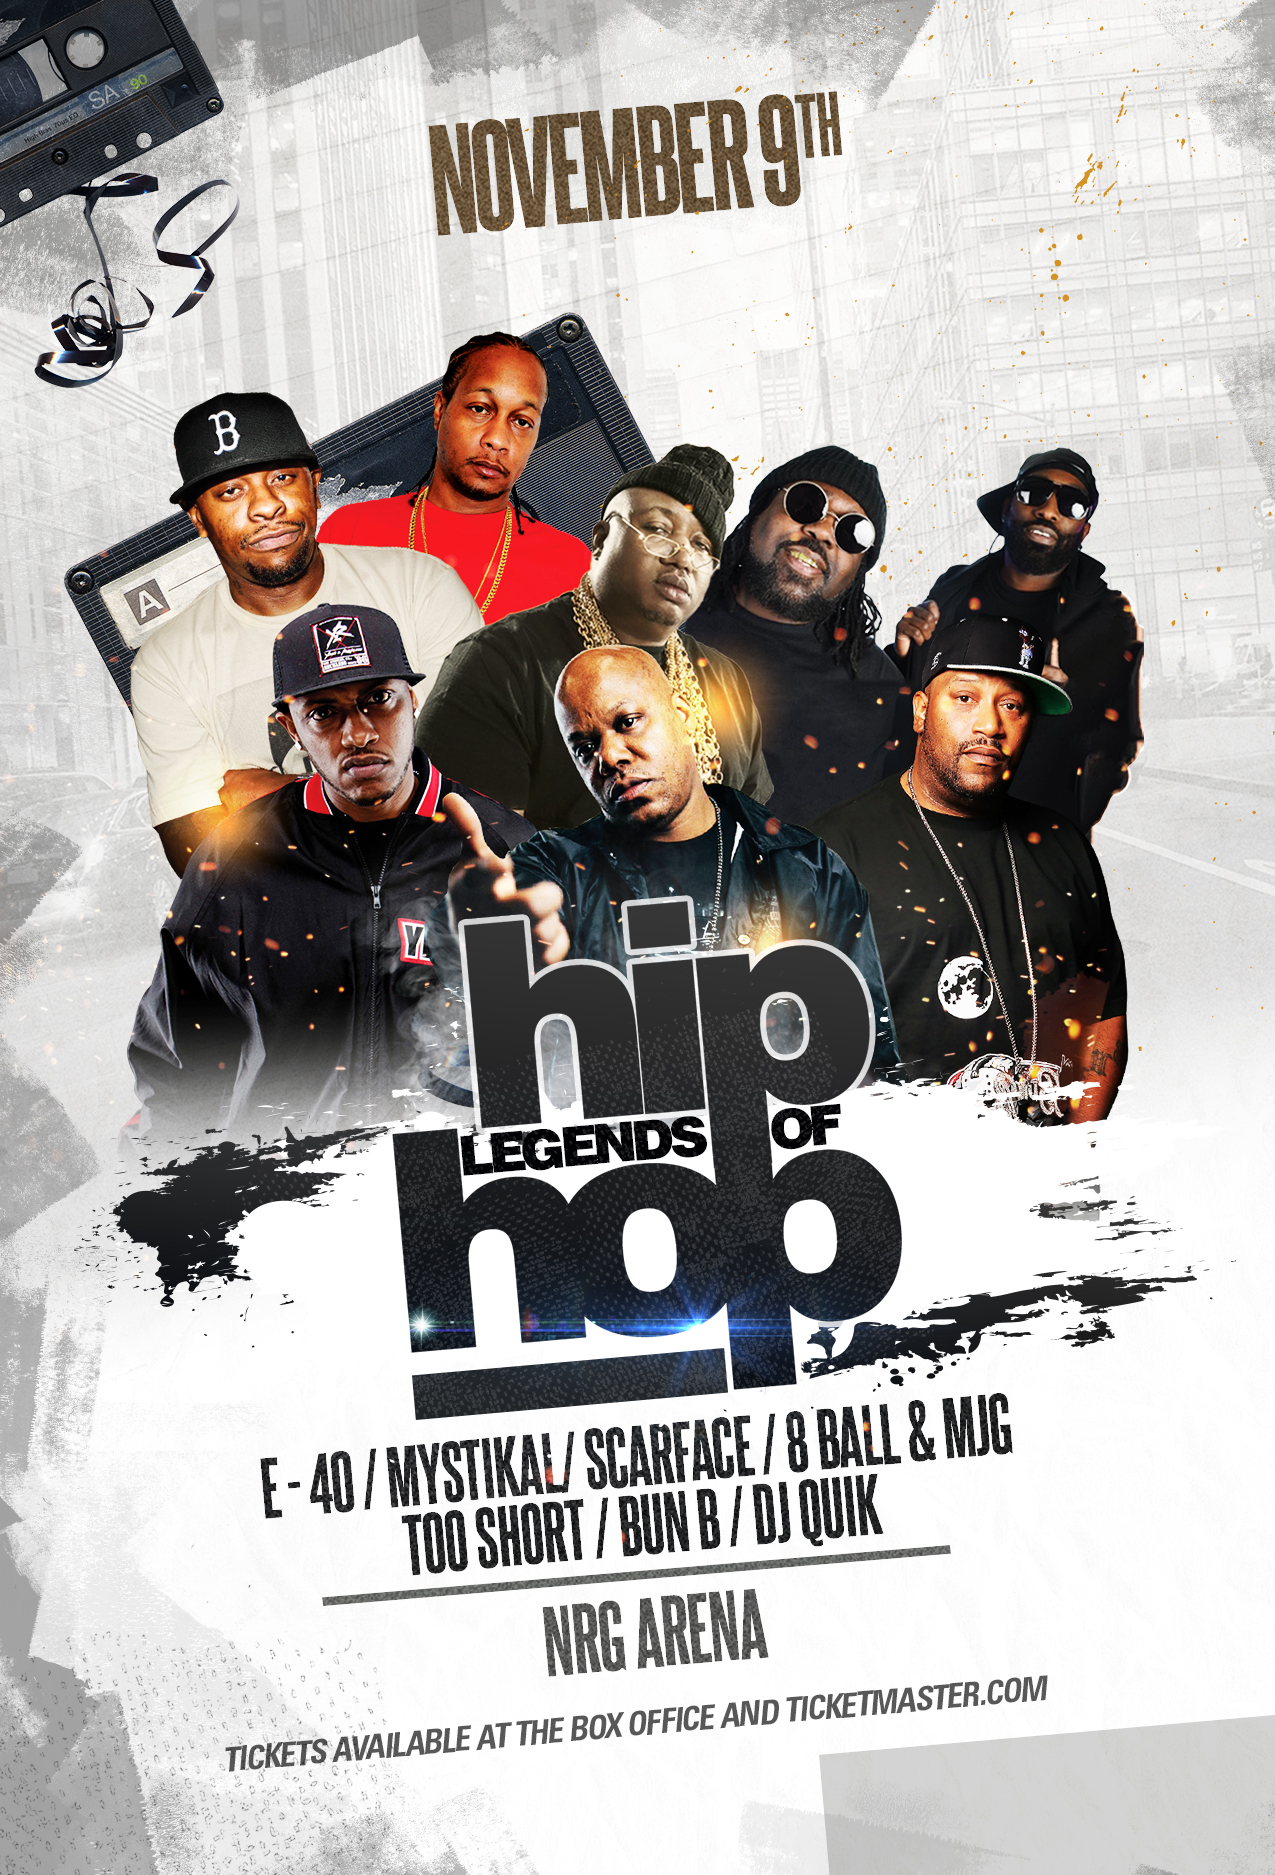 Legends of Hip Hop Show coming to Houston at the NRG Arena on November 9th